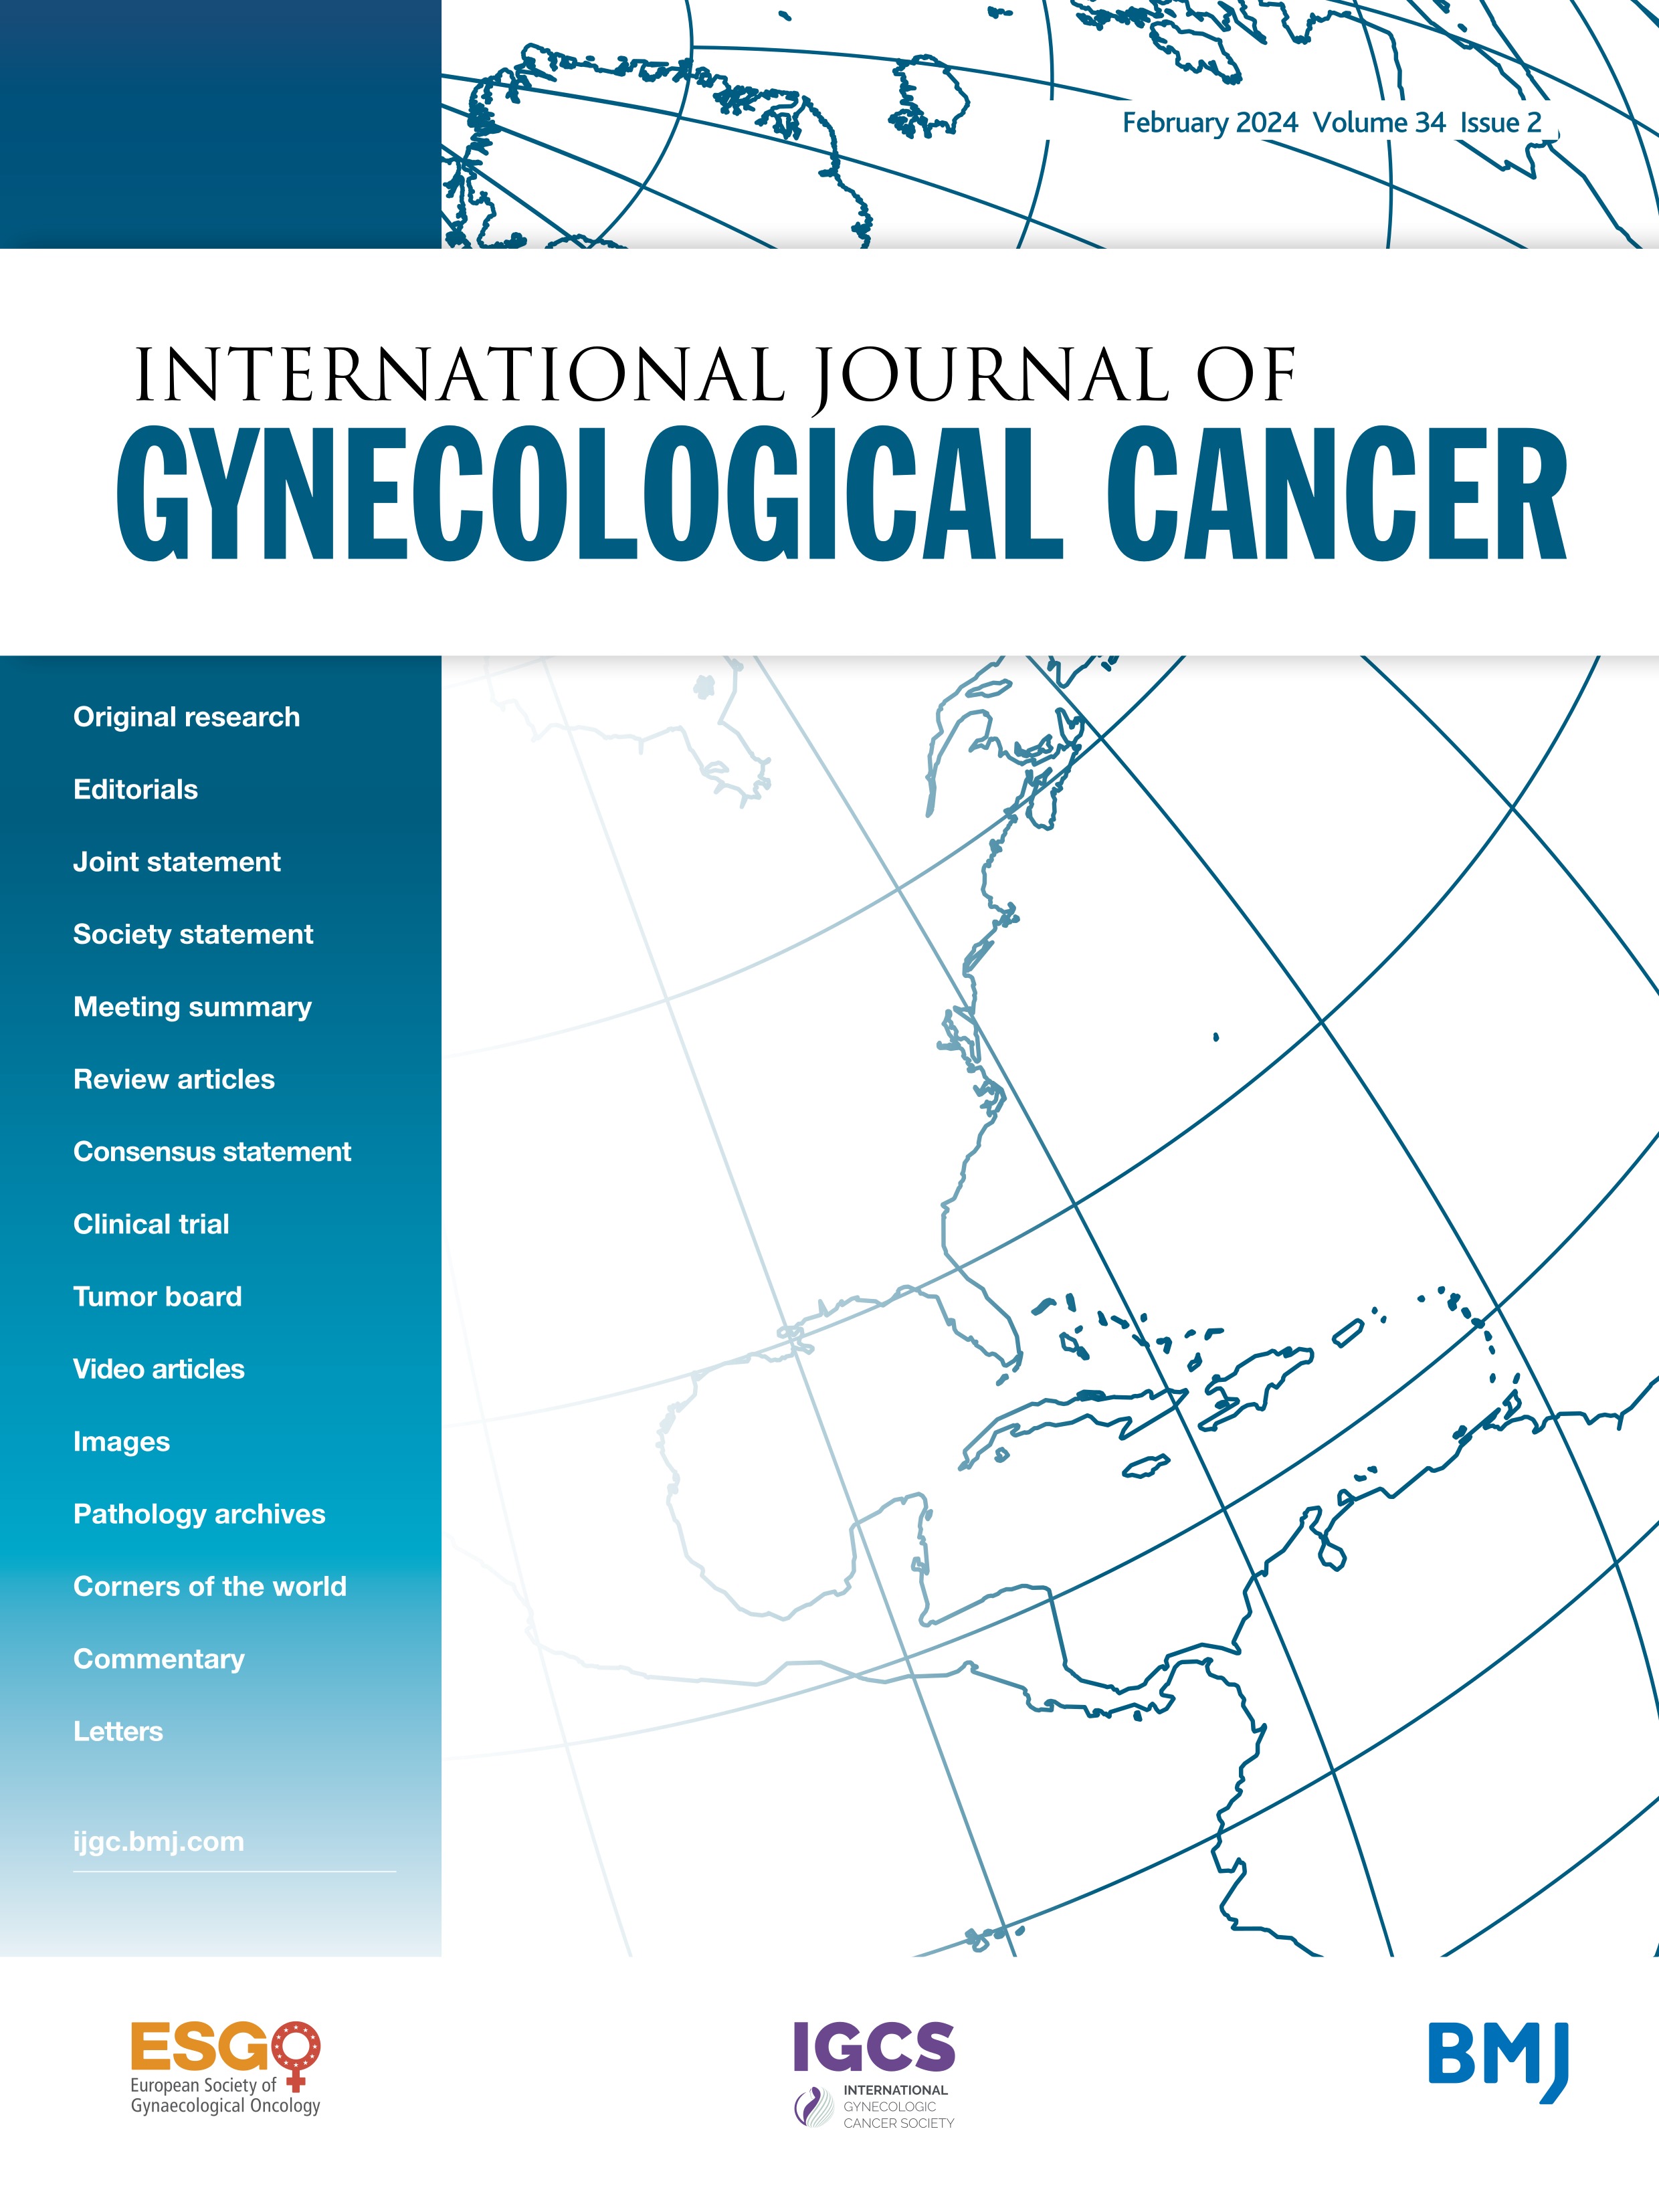 Development and clinical application of a tool to identify frailty in elderly patients with gynecological cancers